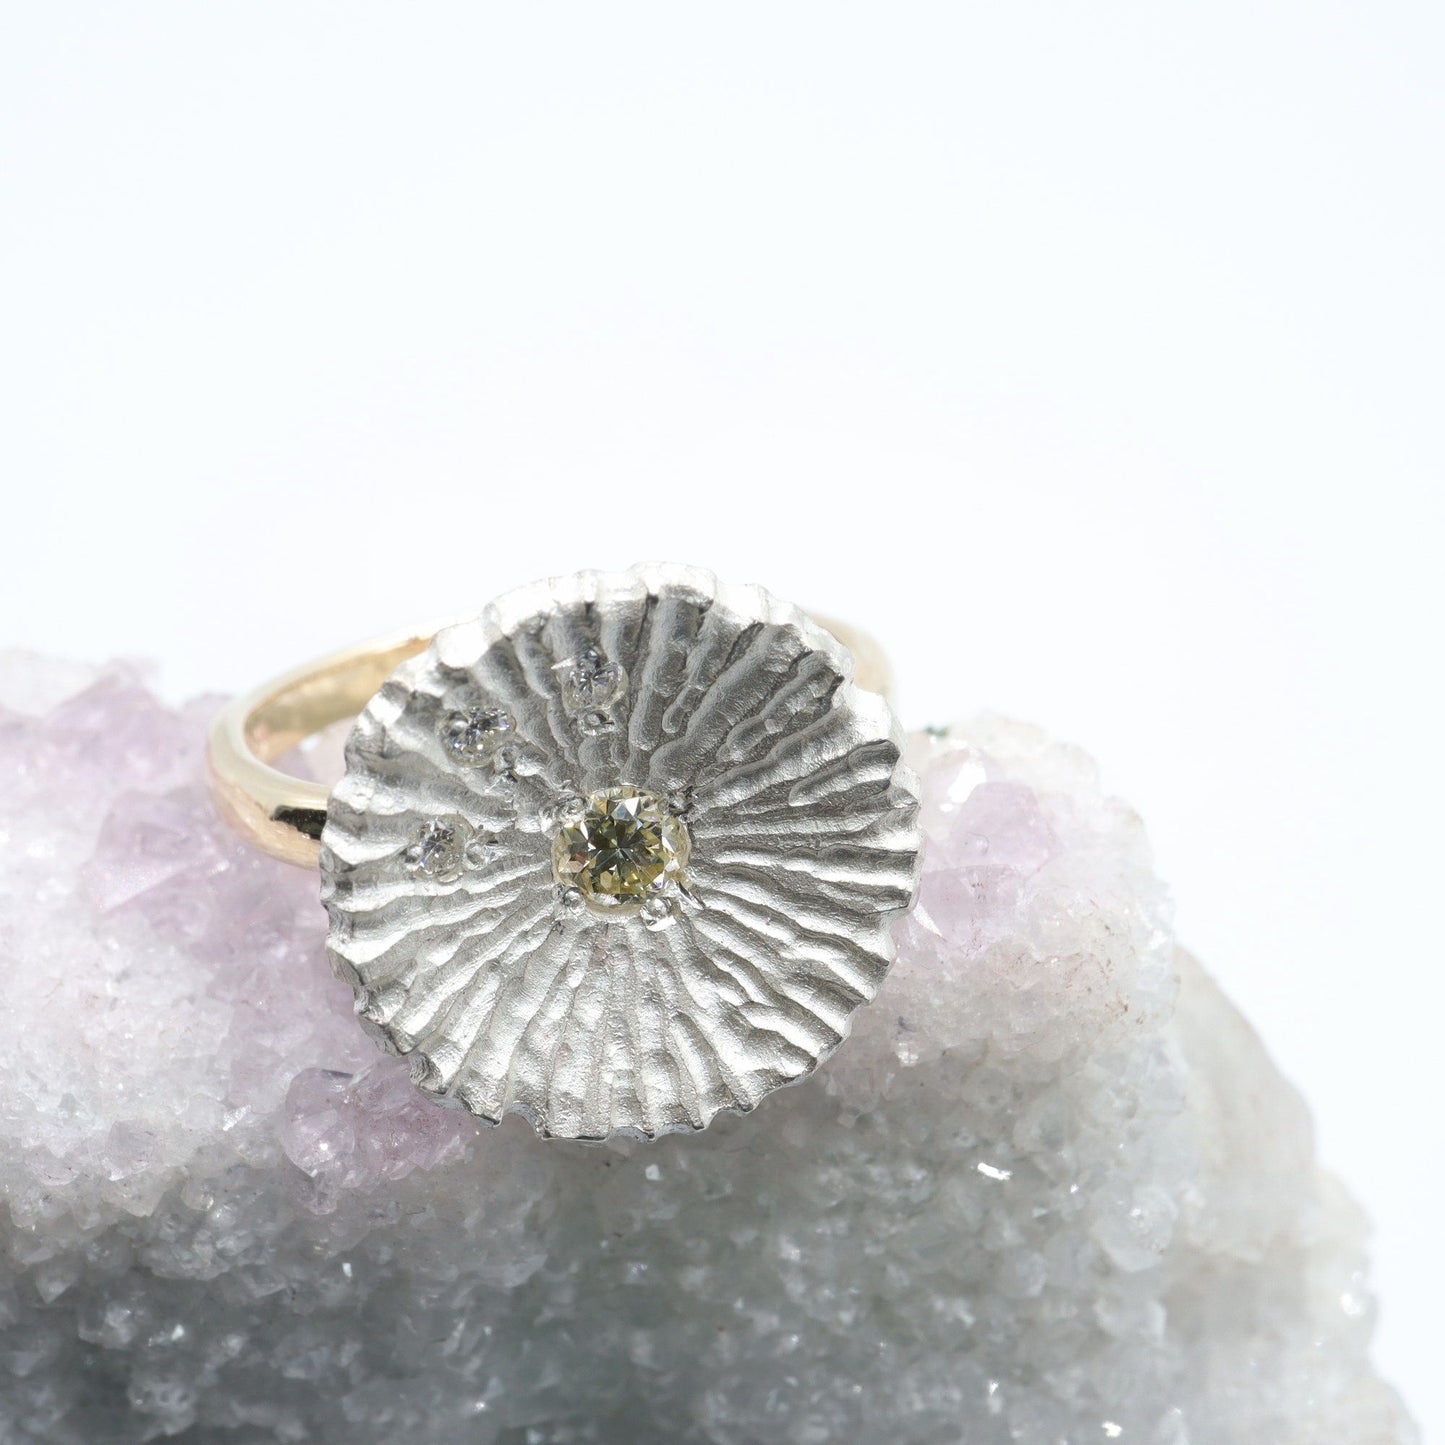 Yellow diamond gold cluster ring, Water Lilies design.